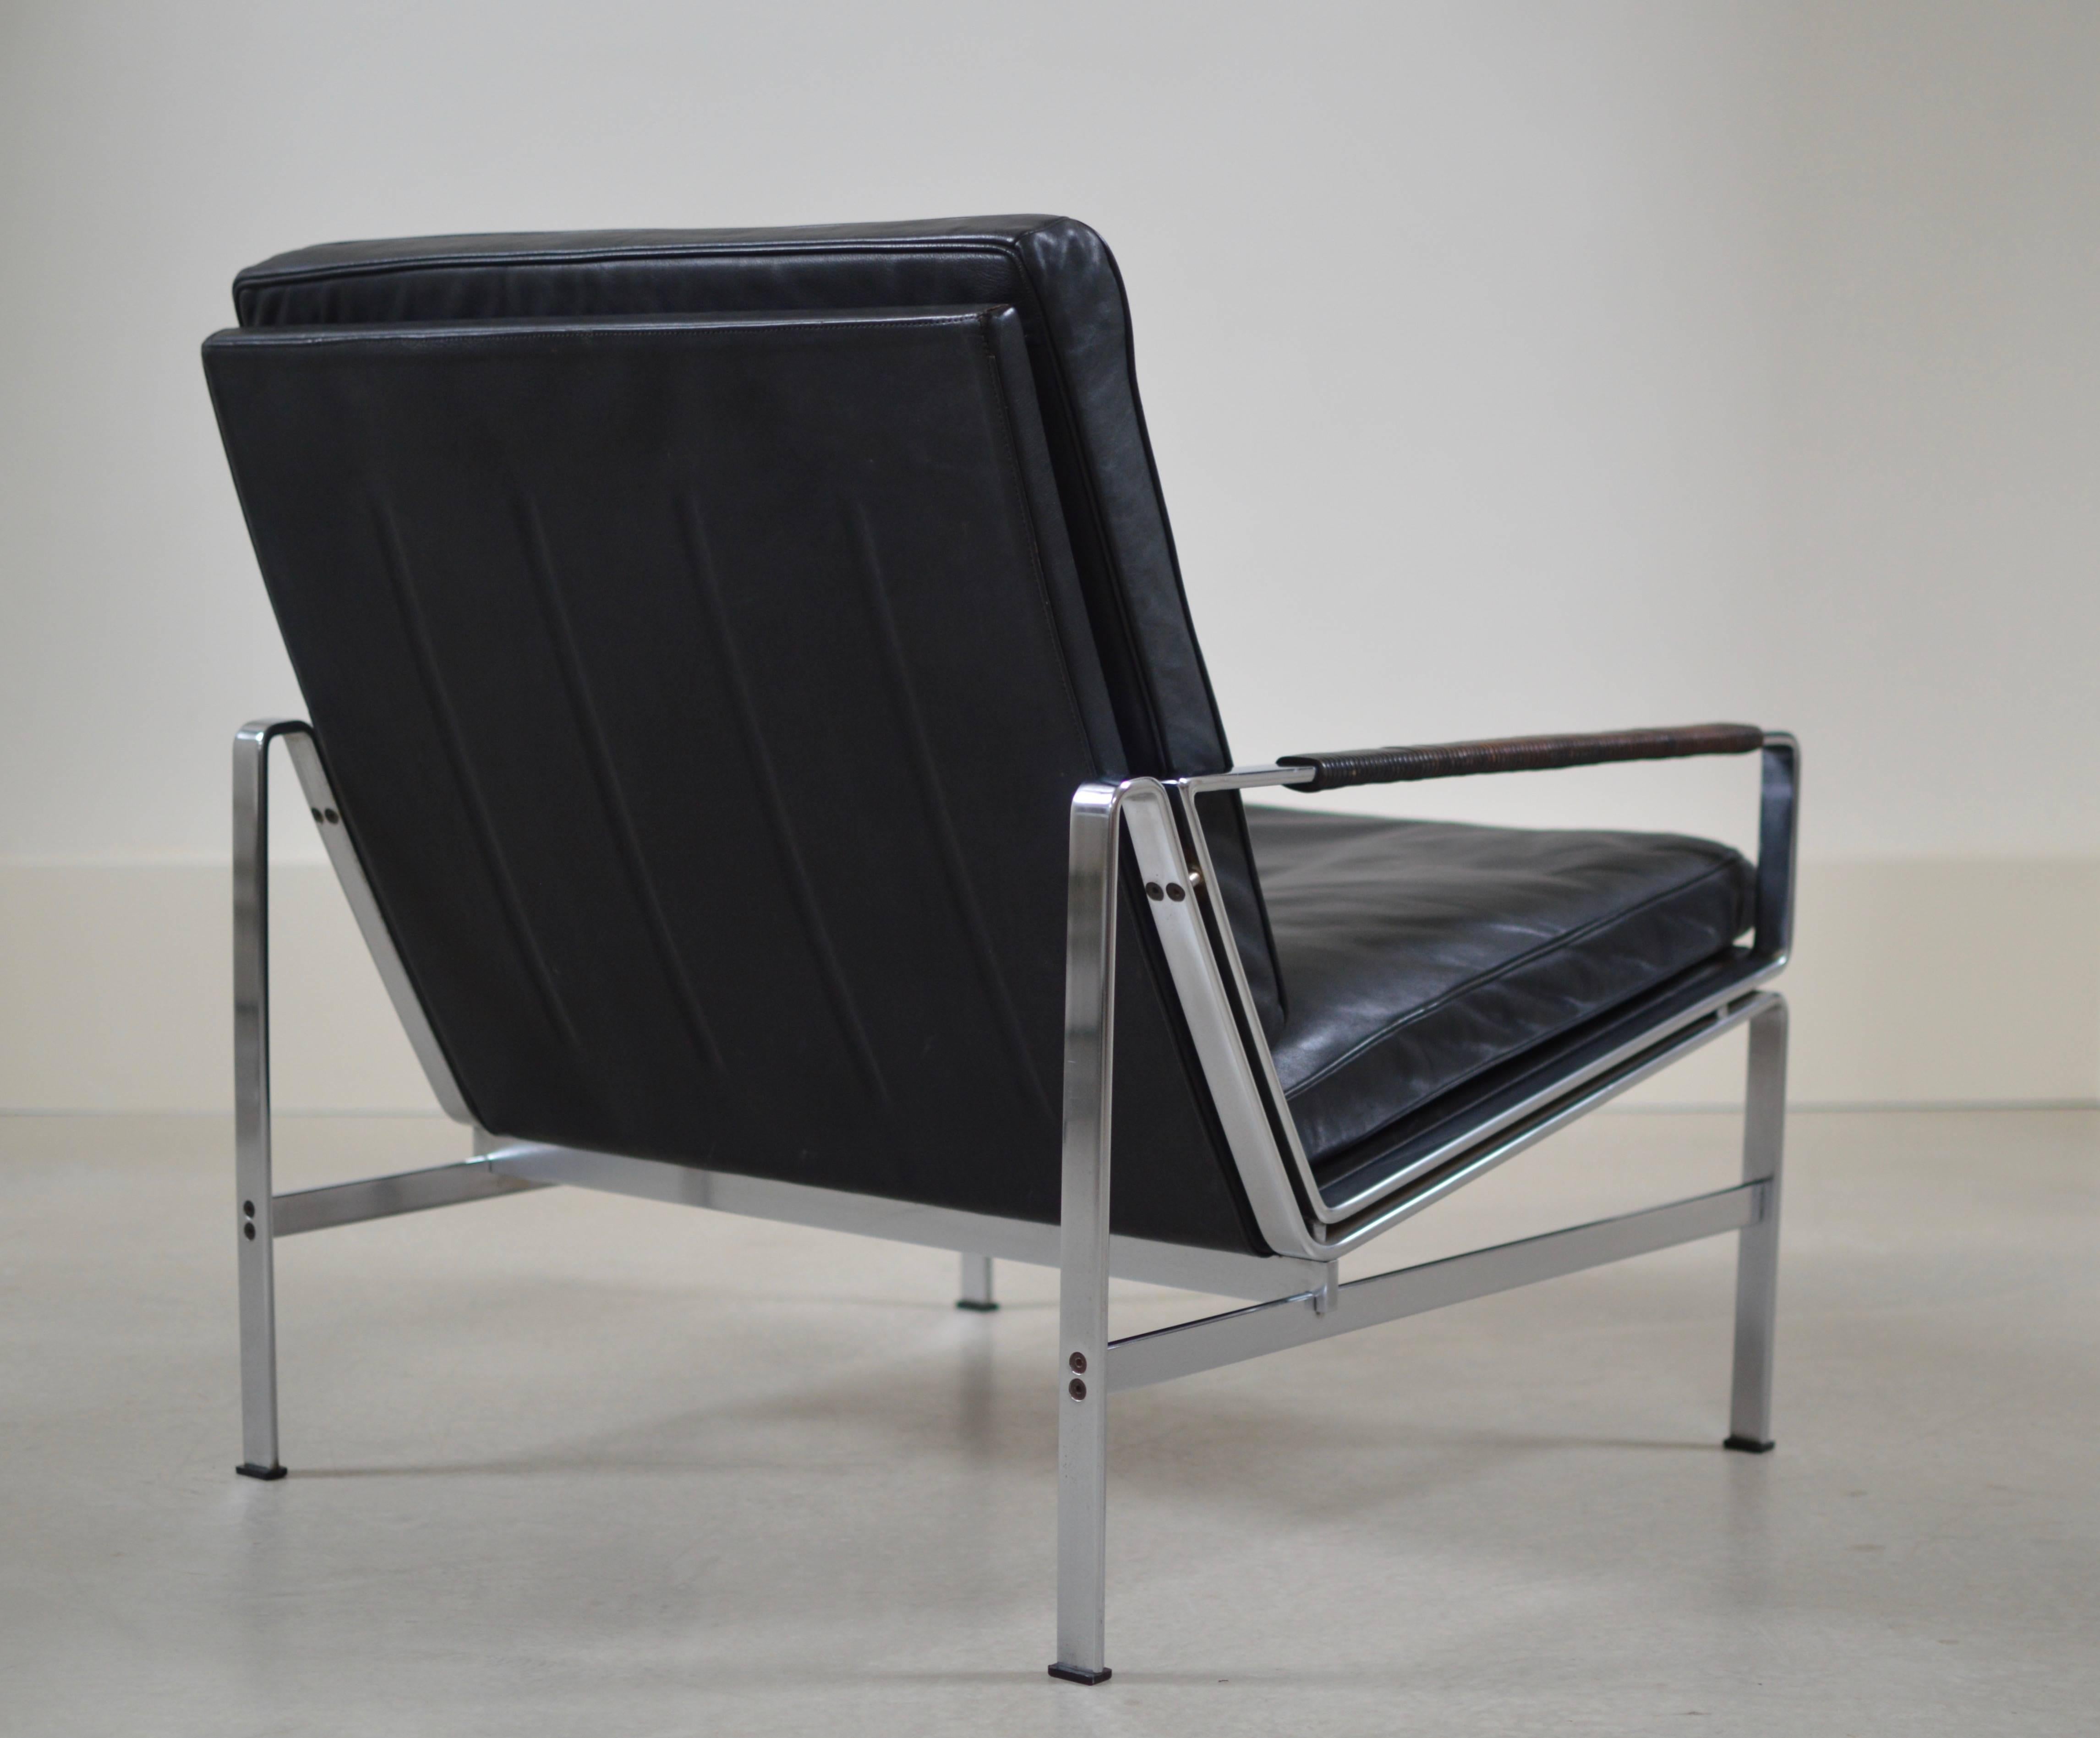 Armchair model 6720-1 by Preben Fabricius & Jørgen Kastholm by Alfred Kill. 
Upholstery is executed in 'yet black' leather with signature leather lace wrapped arm rest that turned wonderful patinated through out almost 50 years of gently use. The